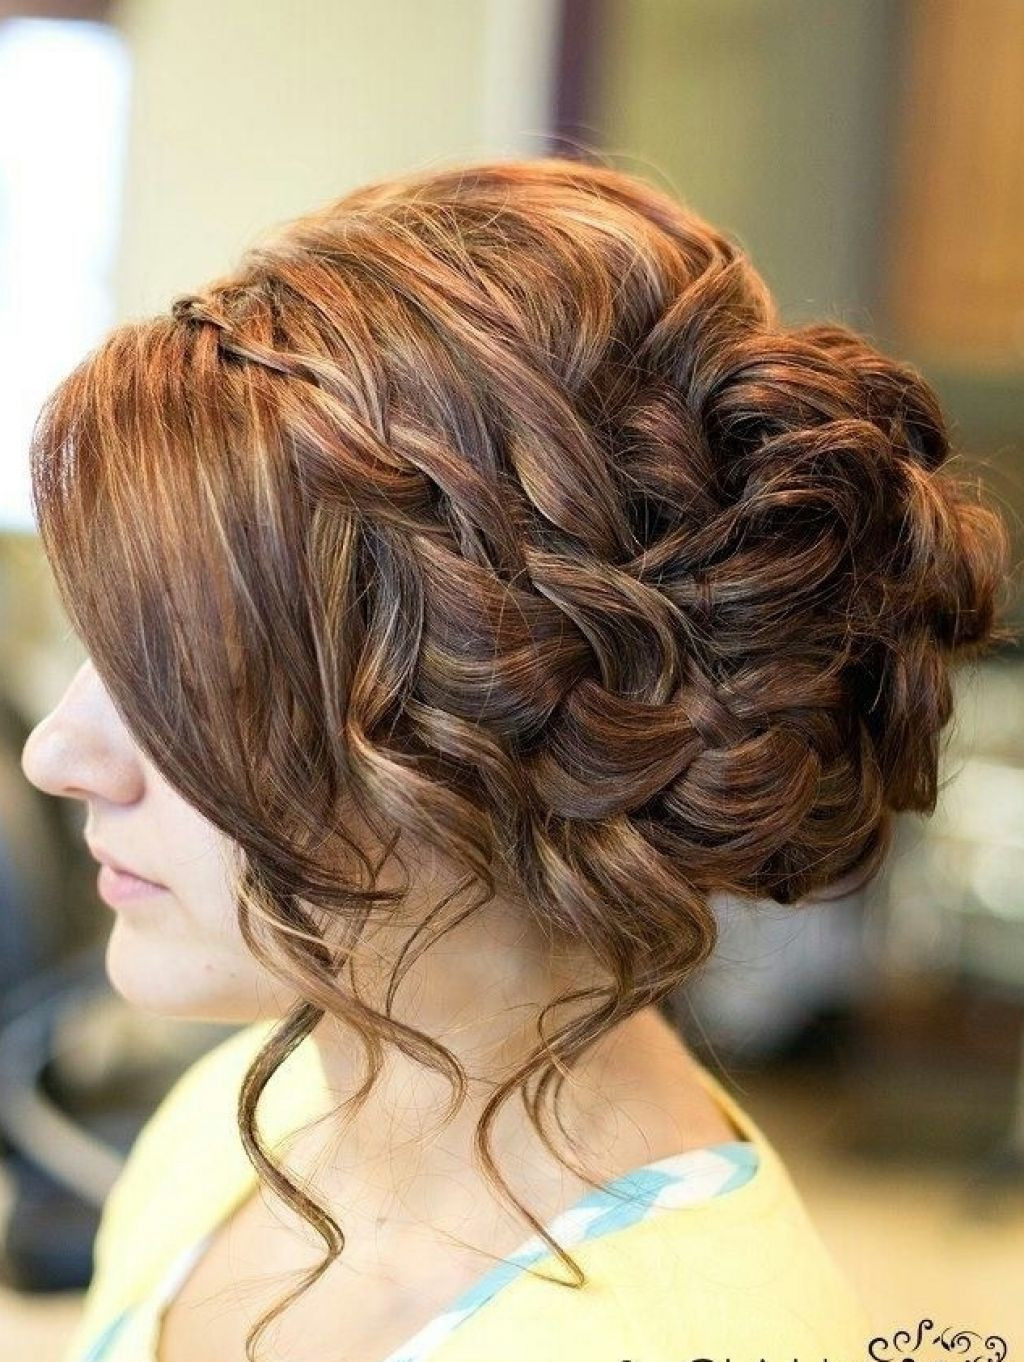 Prom Bun Hairstyles
 14 Prom Hairstyles for Long Hair that are Simply Adorable